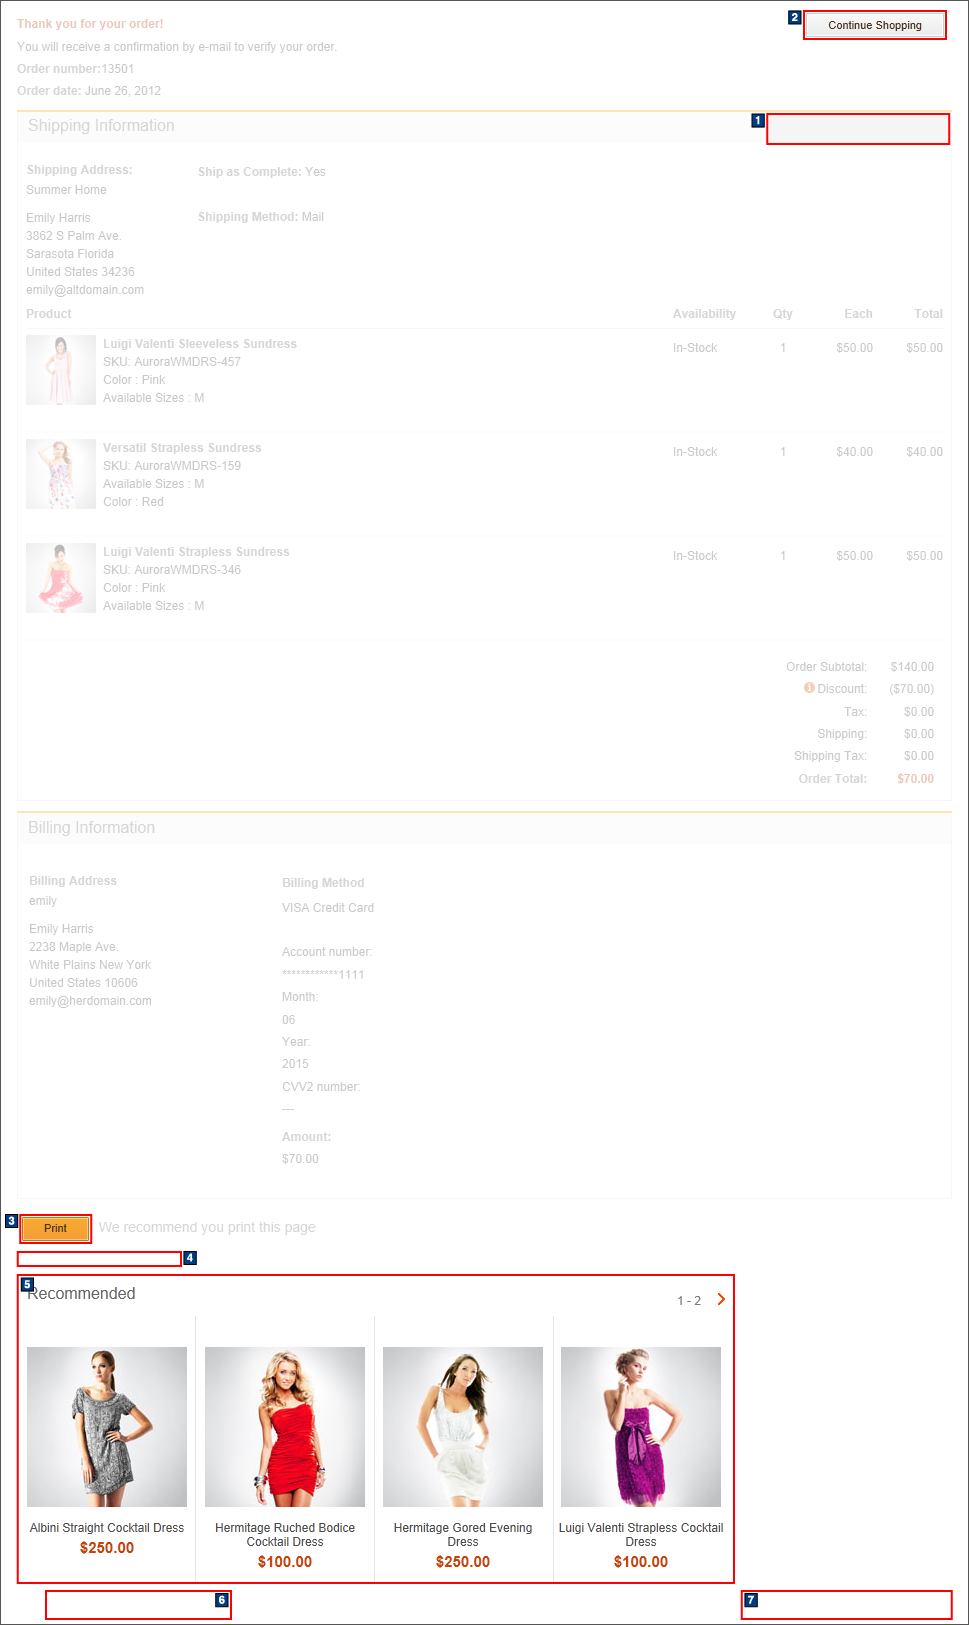 Order Confirmation page: Single shipping and billing address screen capture